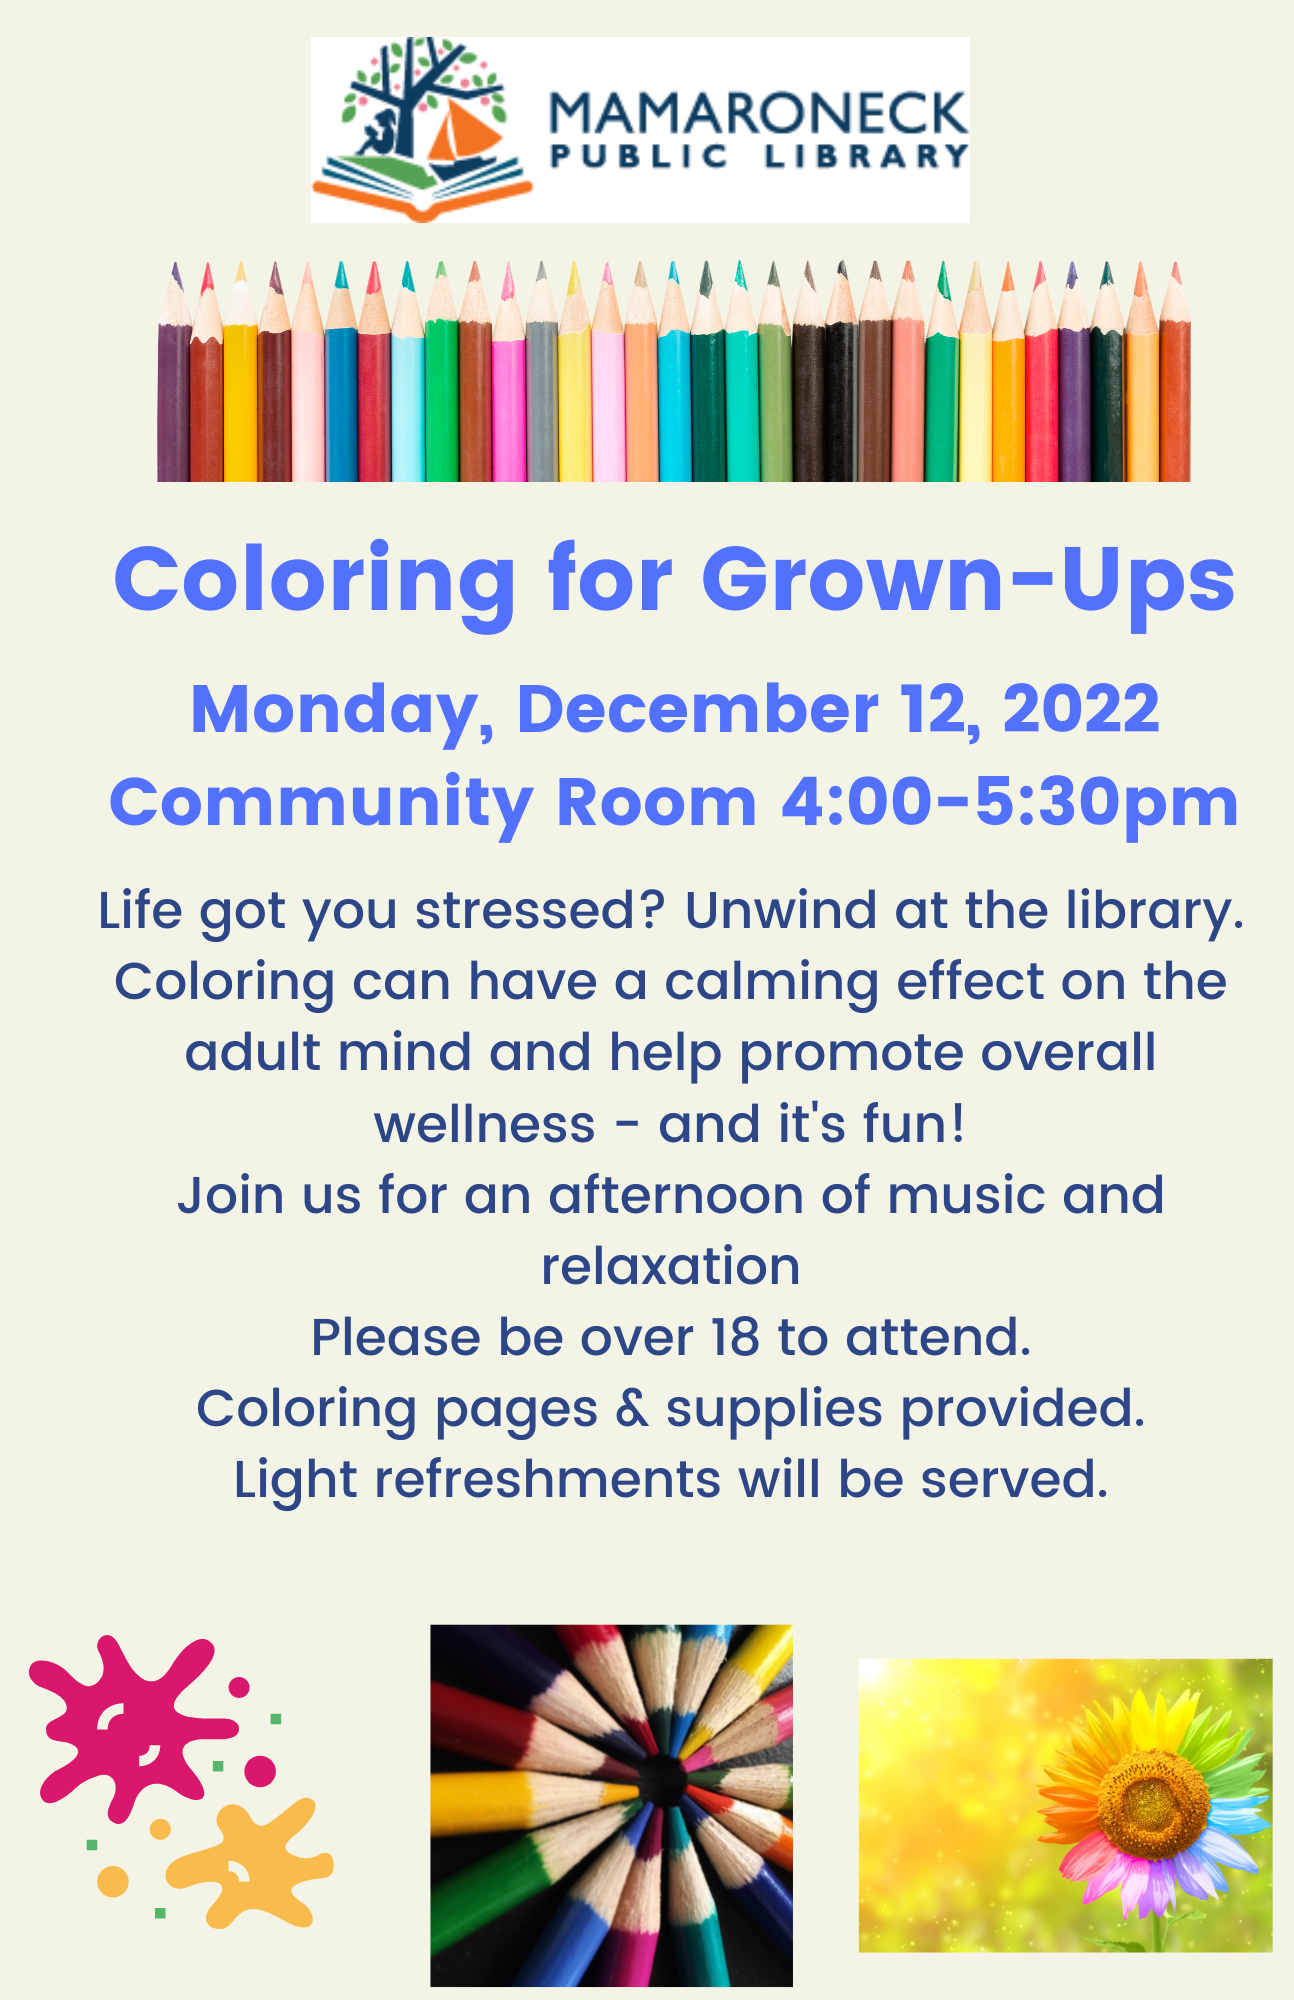 12/12 Coloring for Grown-ups in the Community Room